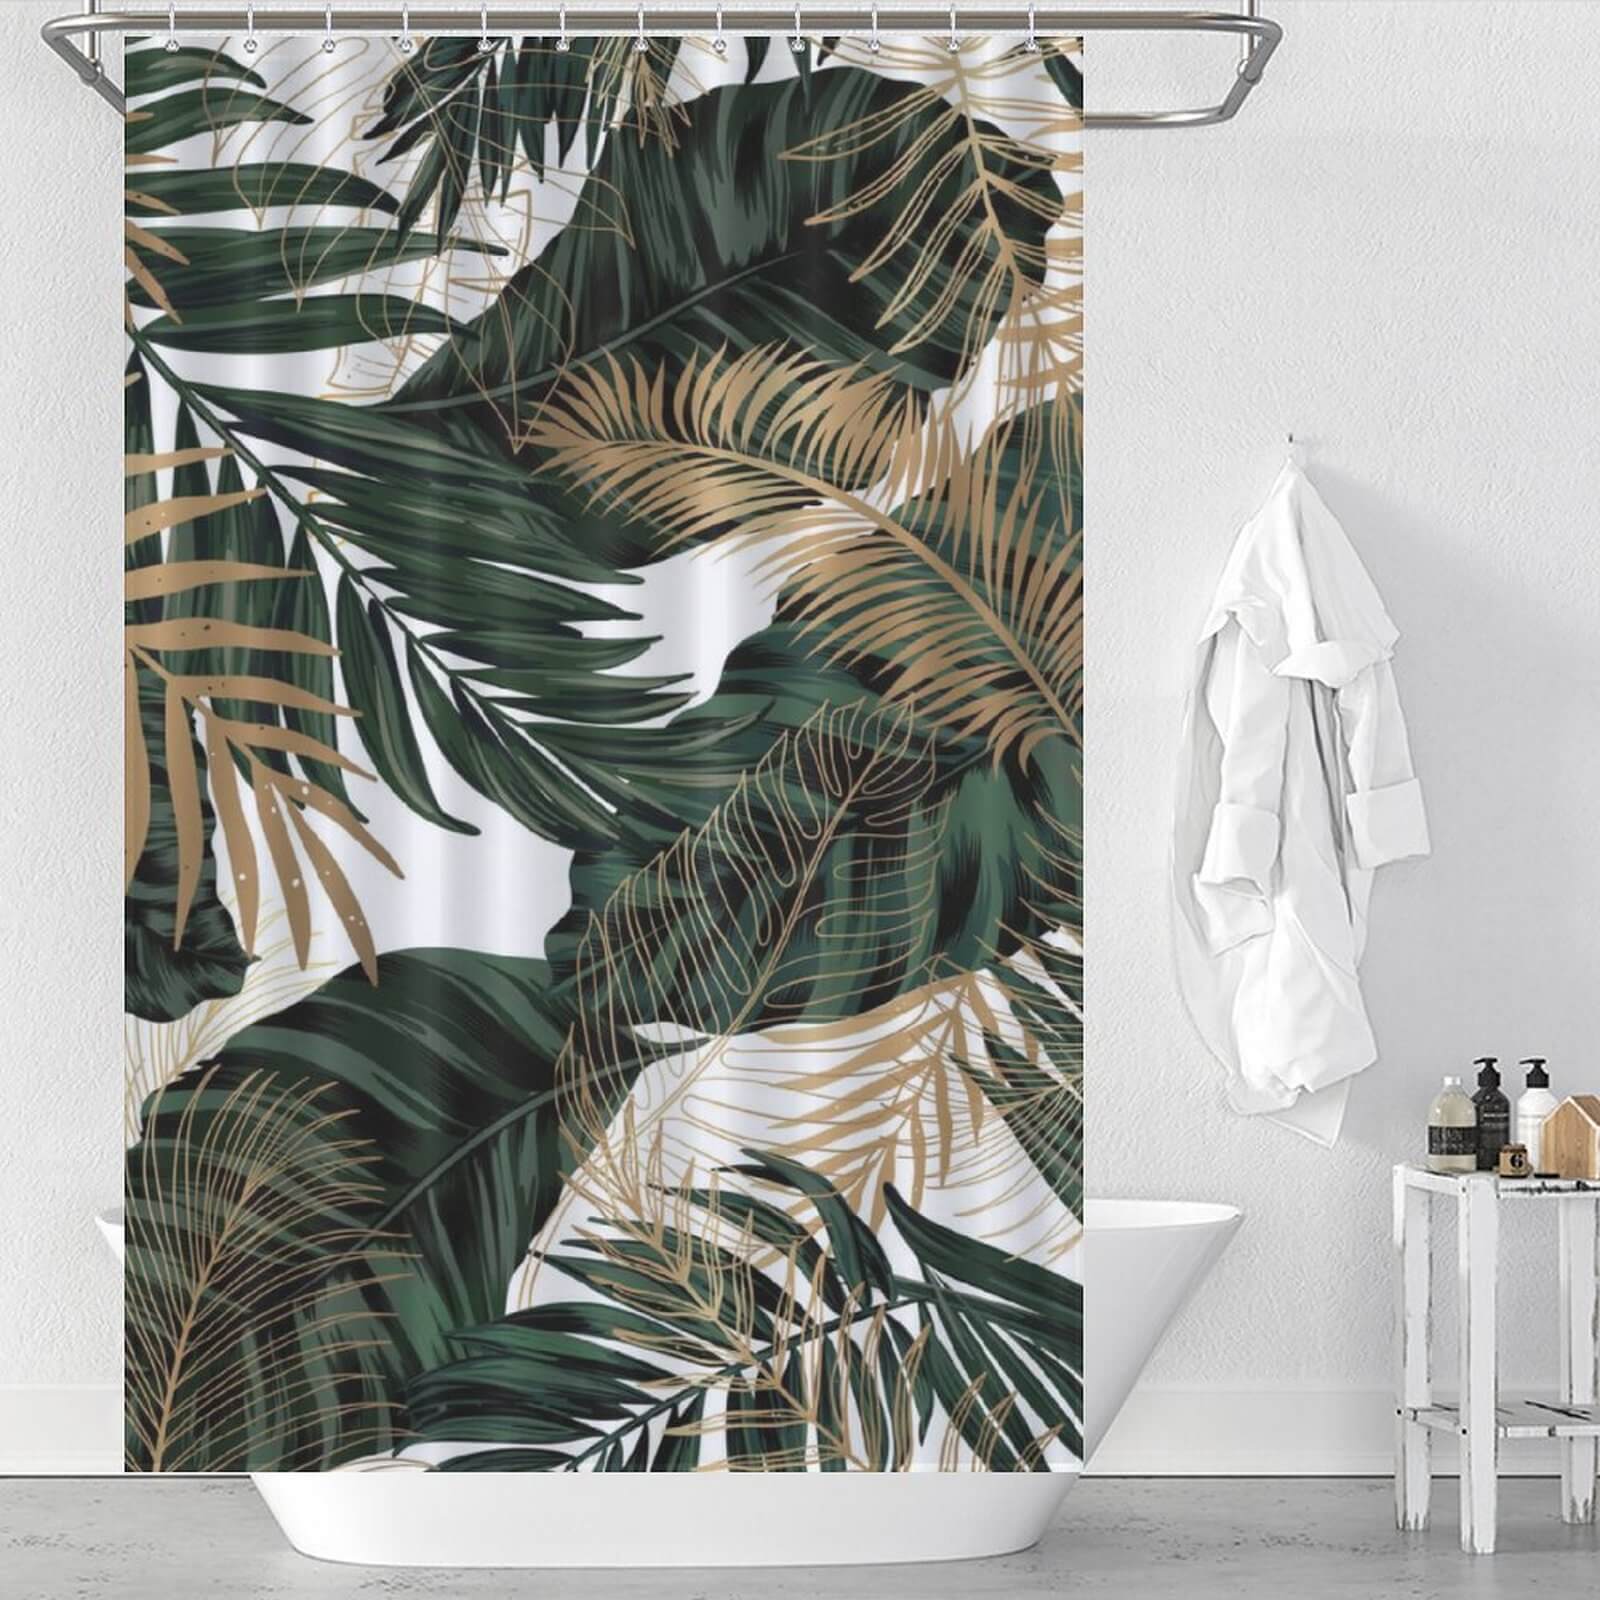 Waterproof Tropical Leaves Jungle Shower Curtain by Cotton Cat for stylish bathroom decor.